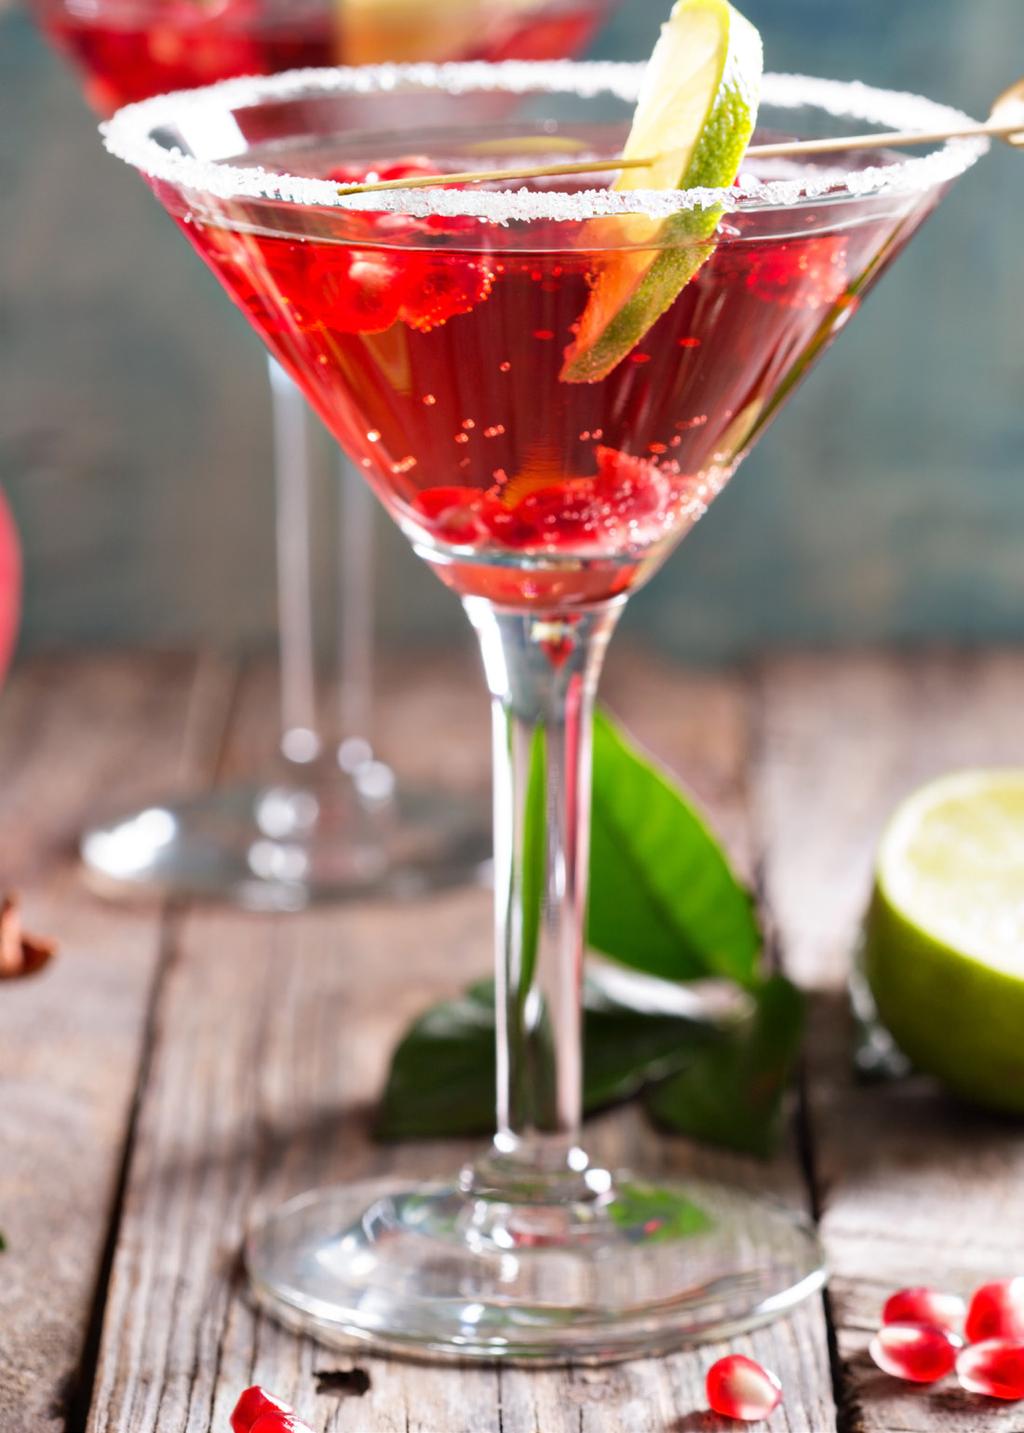 Pomegranite Mojito Mocktail Non-alcoholic cocktails can still be packed with plenty of cheer! This spin on the mint-and-lime classic contains delicious pomegranate seeds and juice.